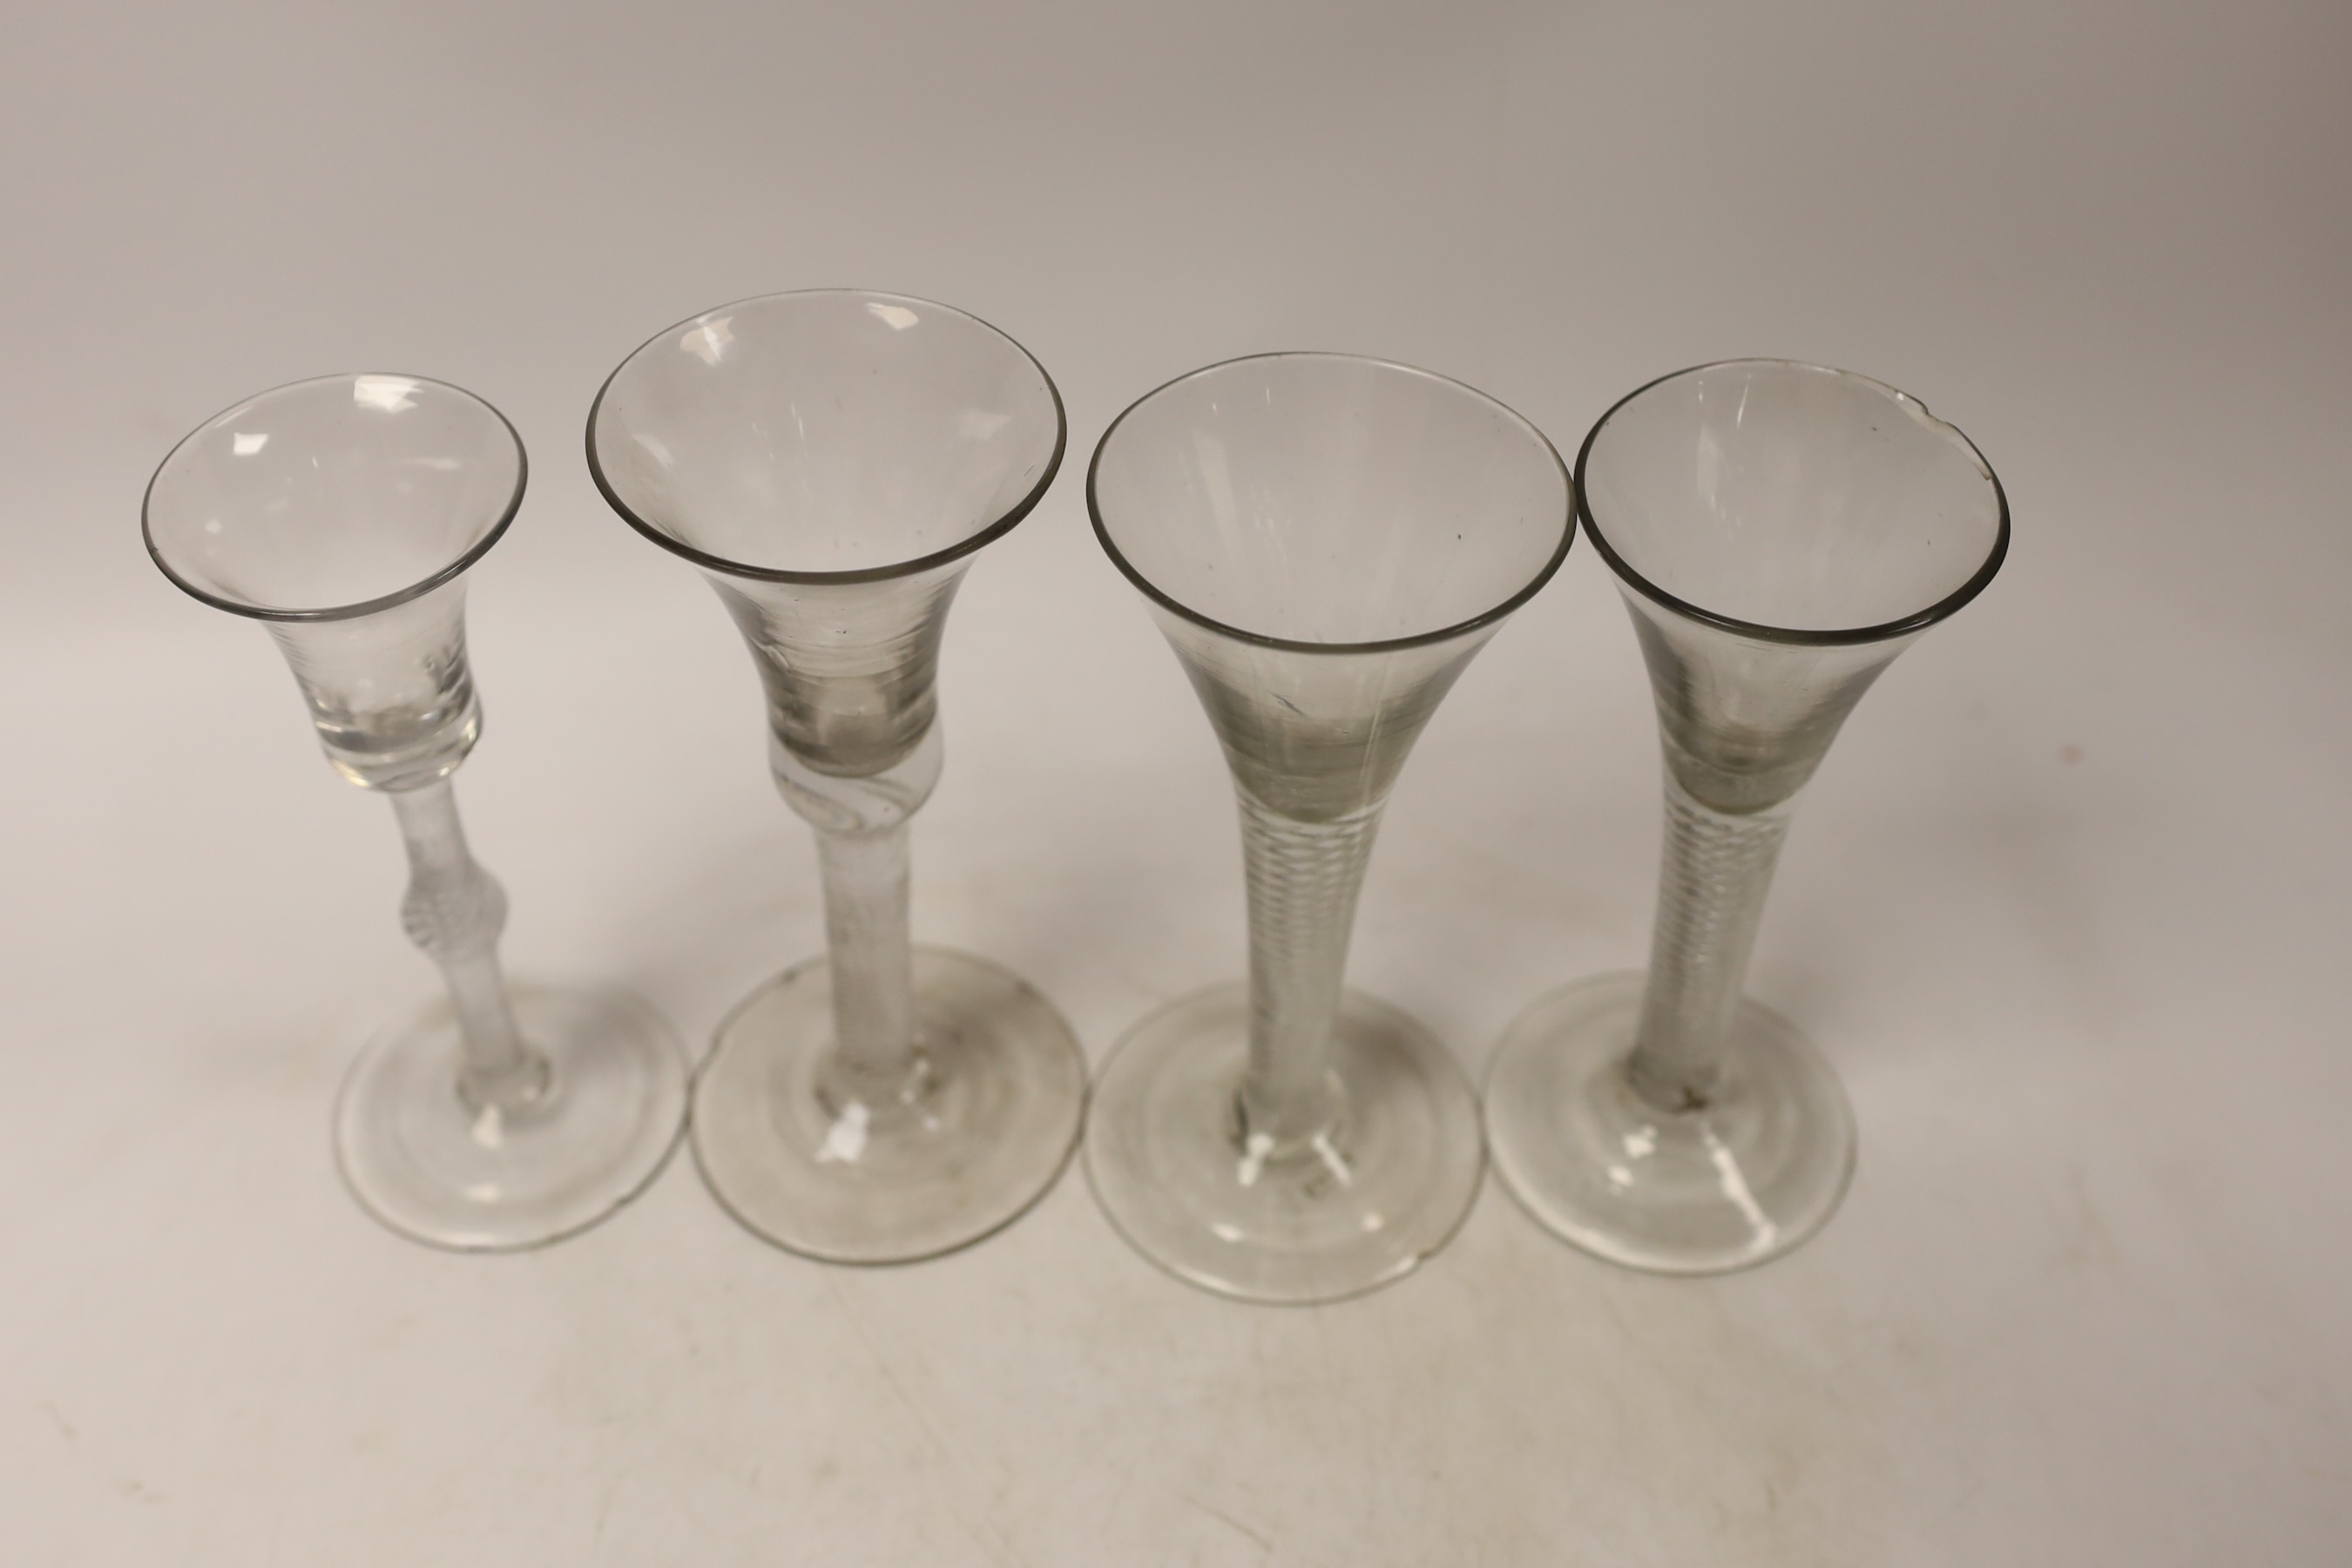 Four mid-18th century DSAT stem wine glasses, two drawn trumpet examples and two with bell shaped bowls, tallest 15.5cm